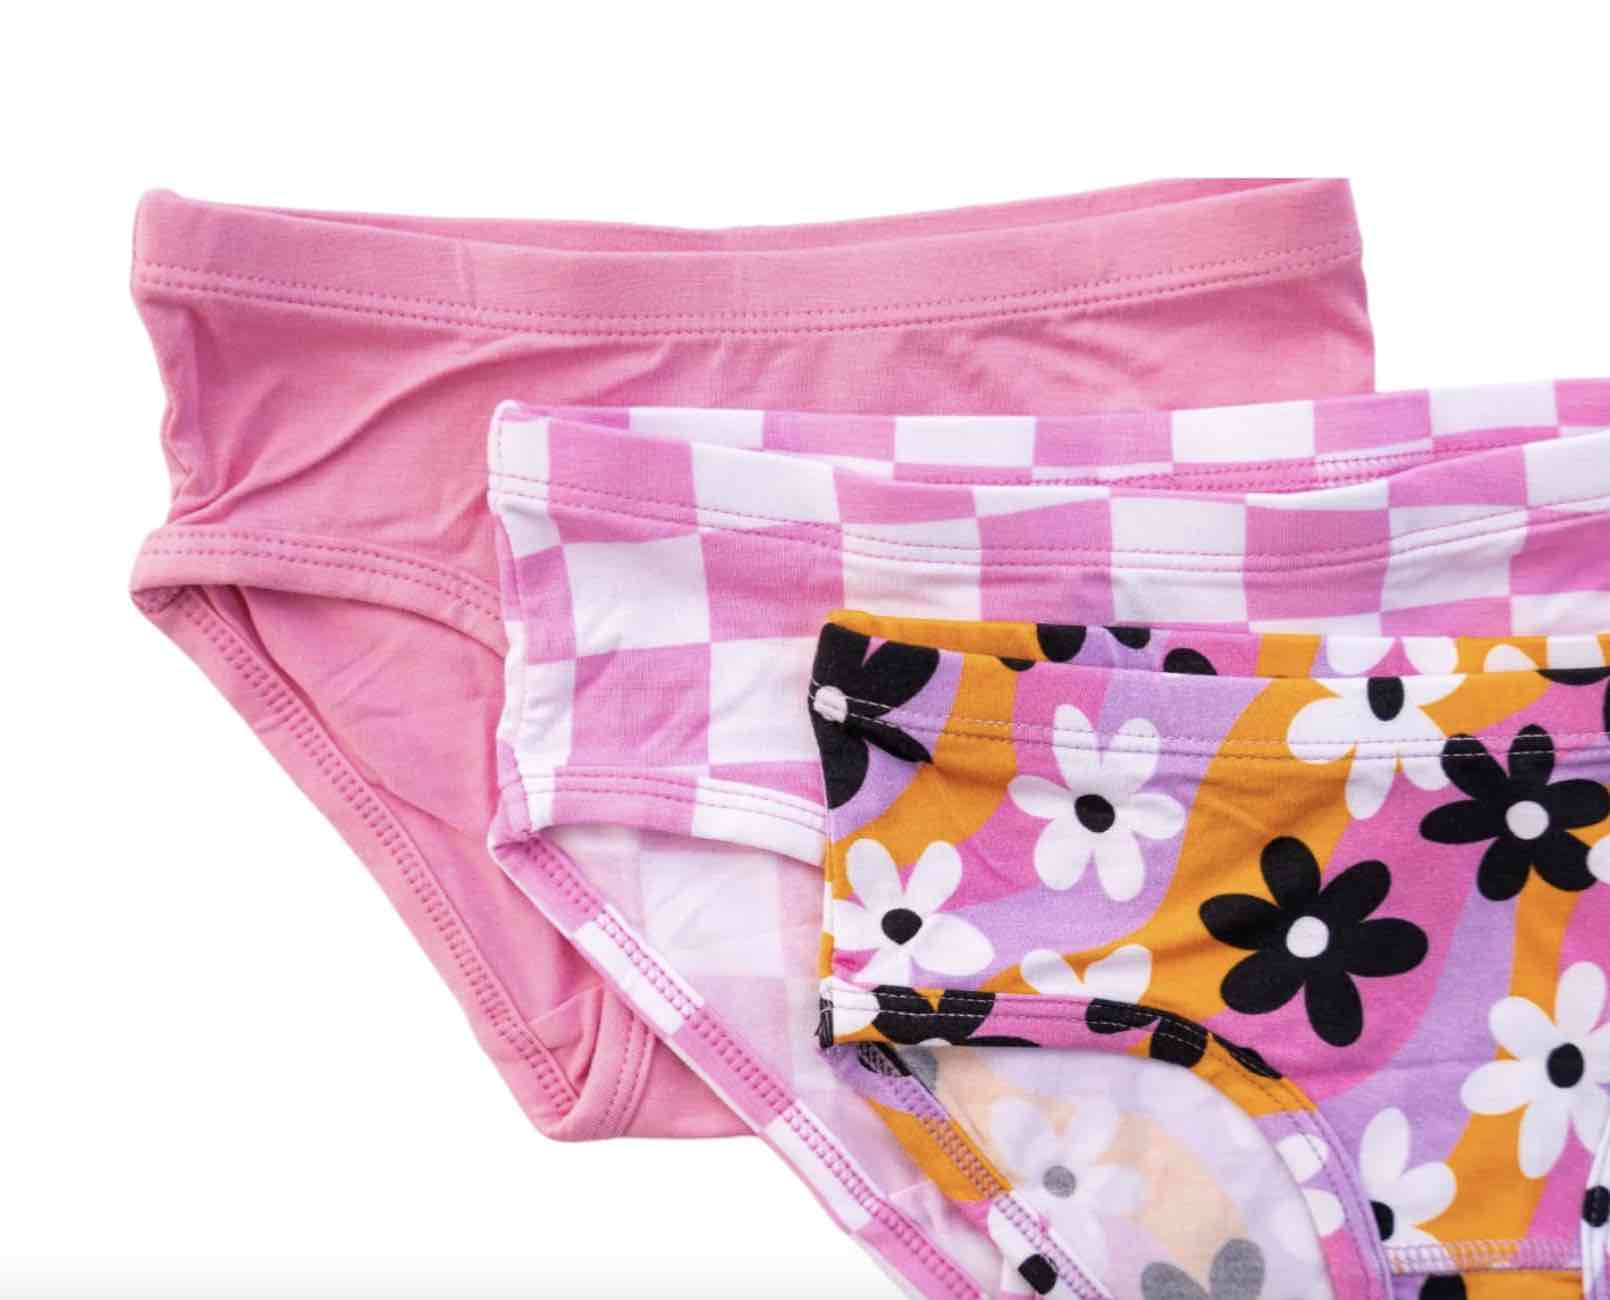 Groovy Checkers Dream Girl's Brief Set